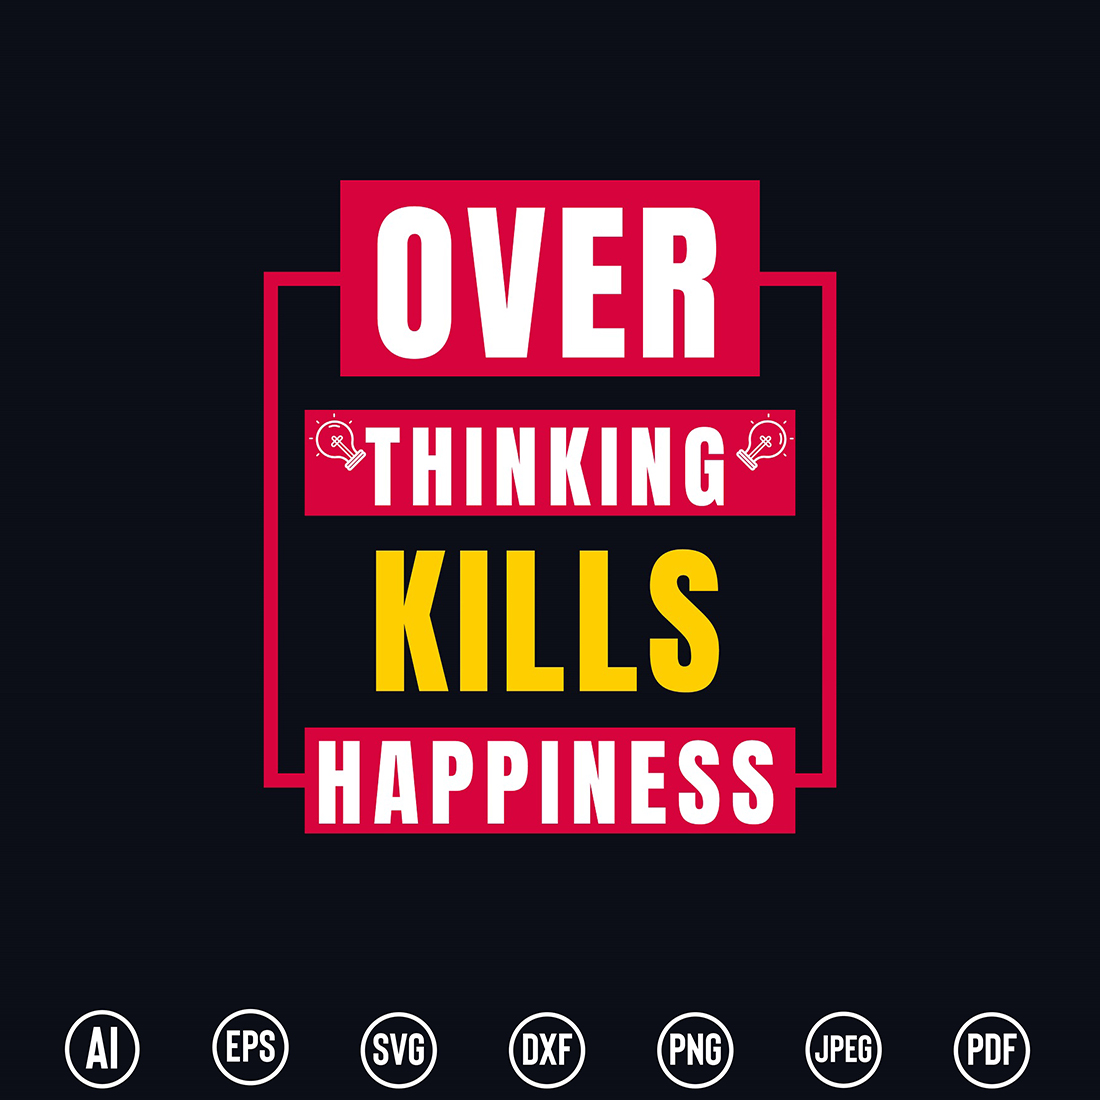 Modern Typography T-Shirt design with “Over Thinking Kills Happiness” quote for t-shirt, posters, stickers, mug prints, banners, gift cards, labels etc preview image.